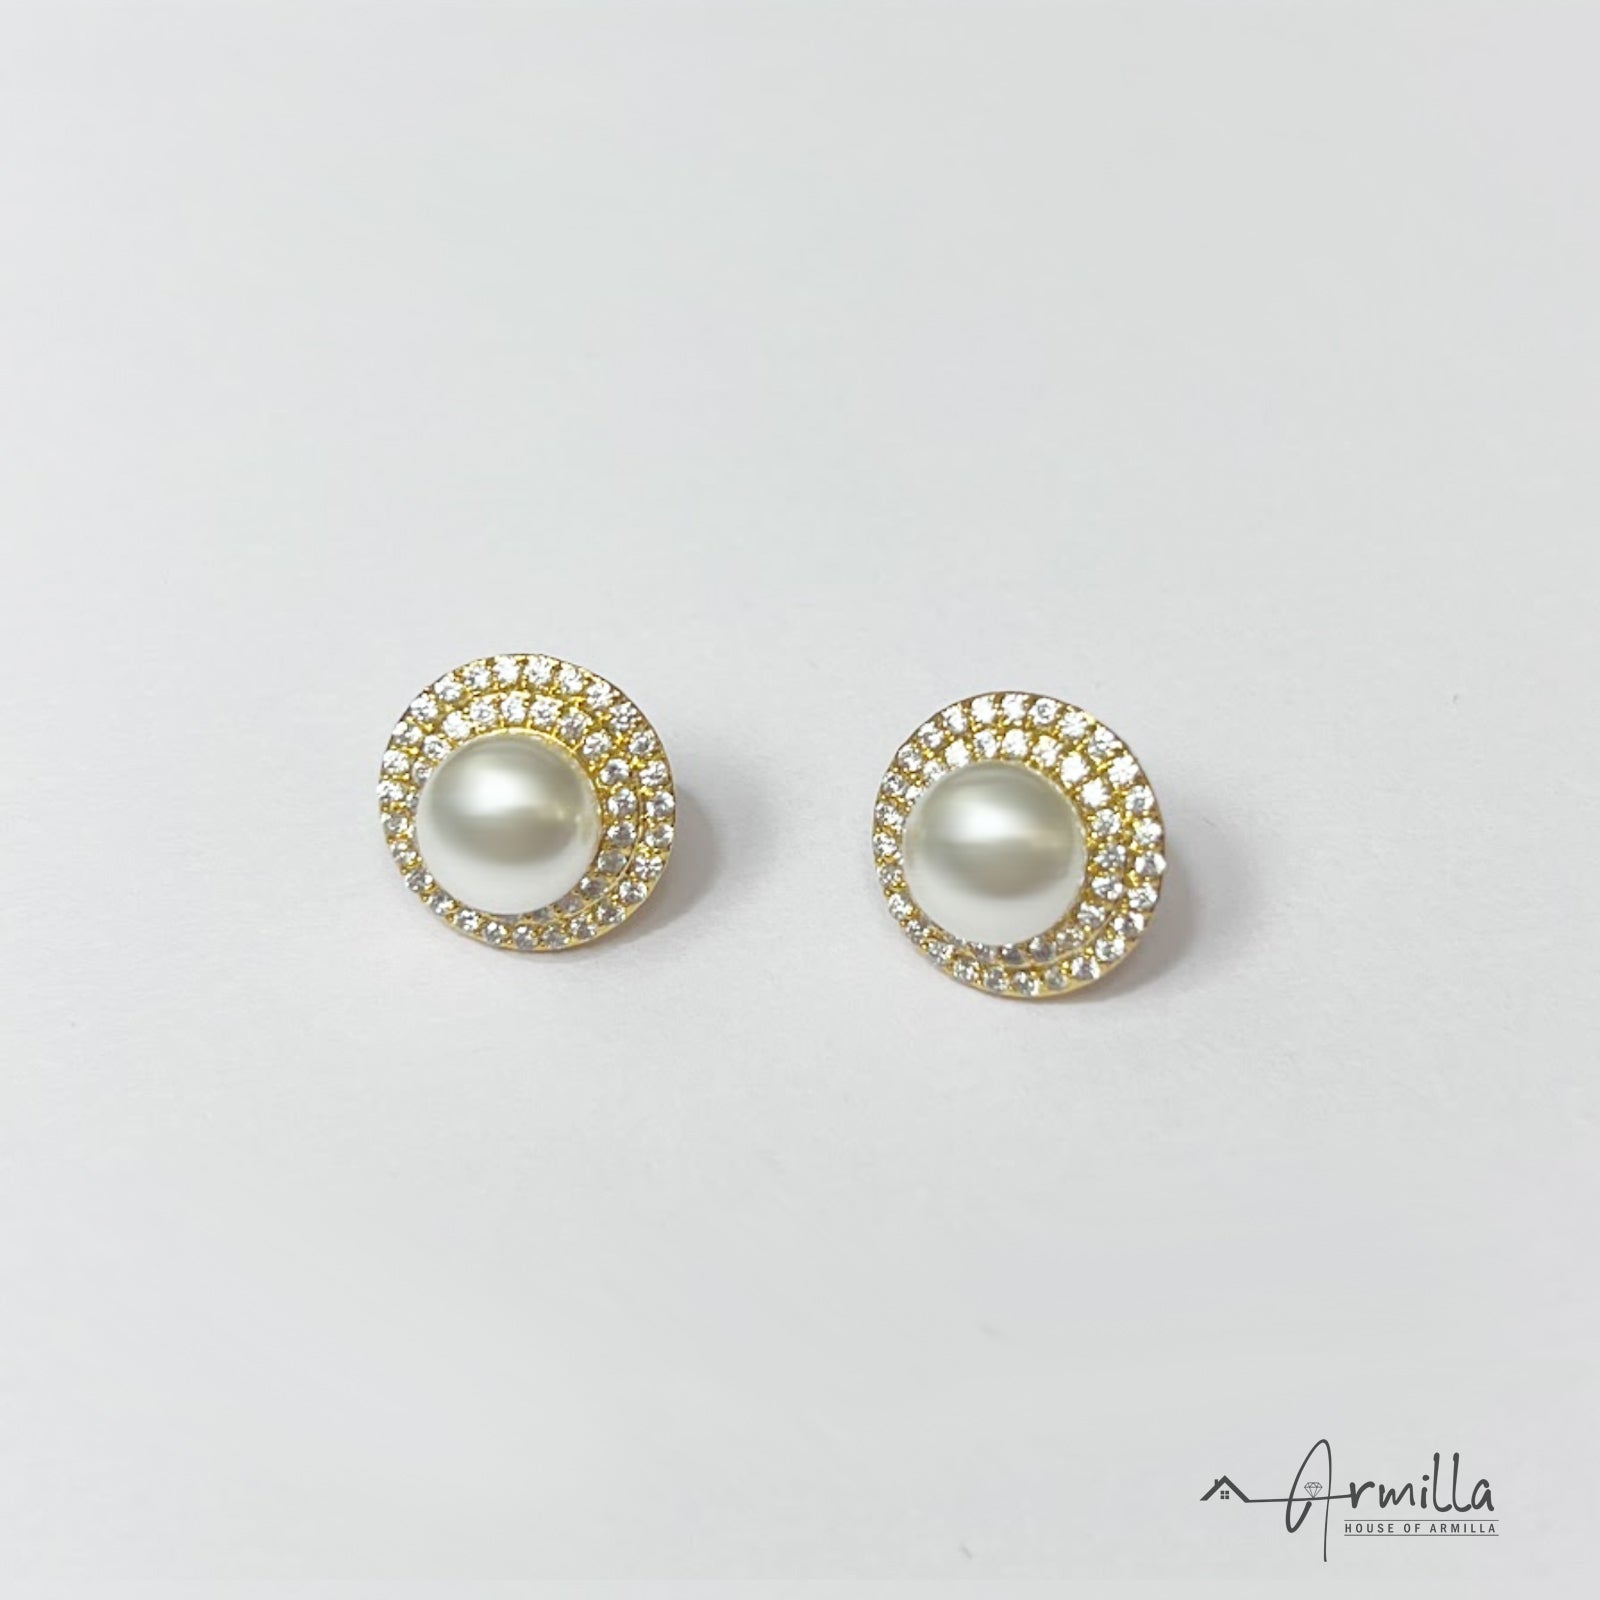 REAL FRESHWATER PEARL AND DIAMOND STUD EARRING IN 925 SILVER